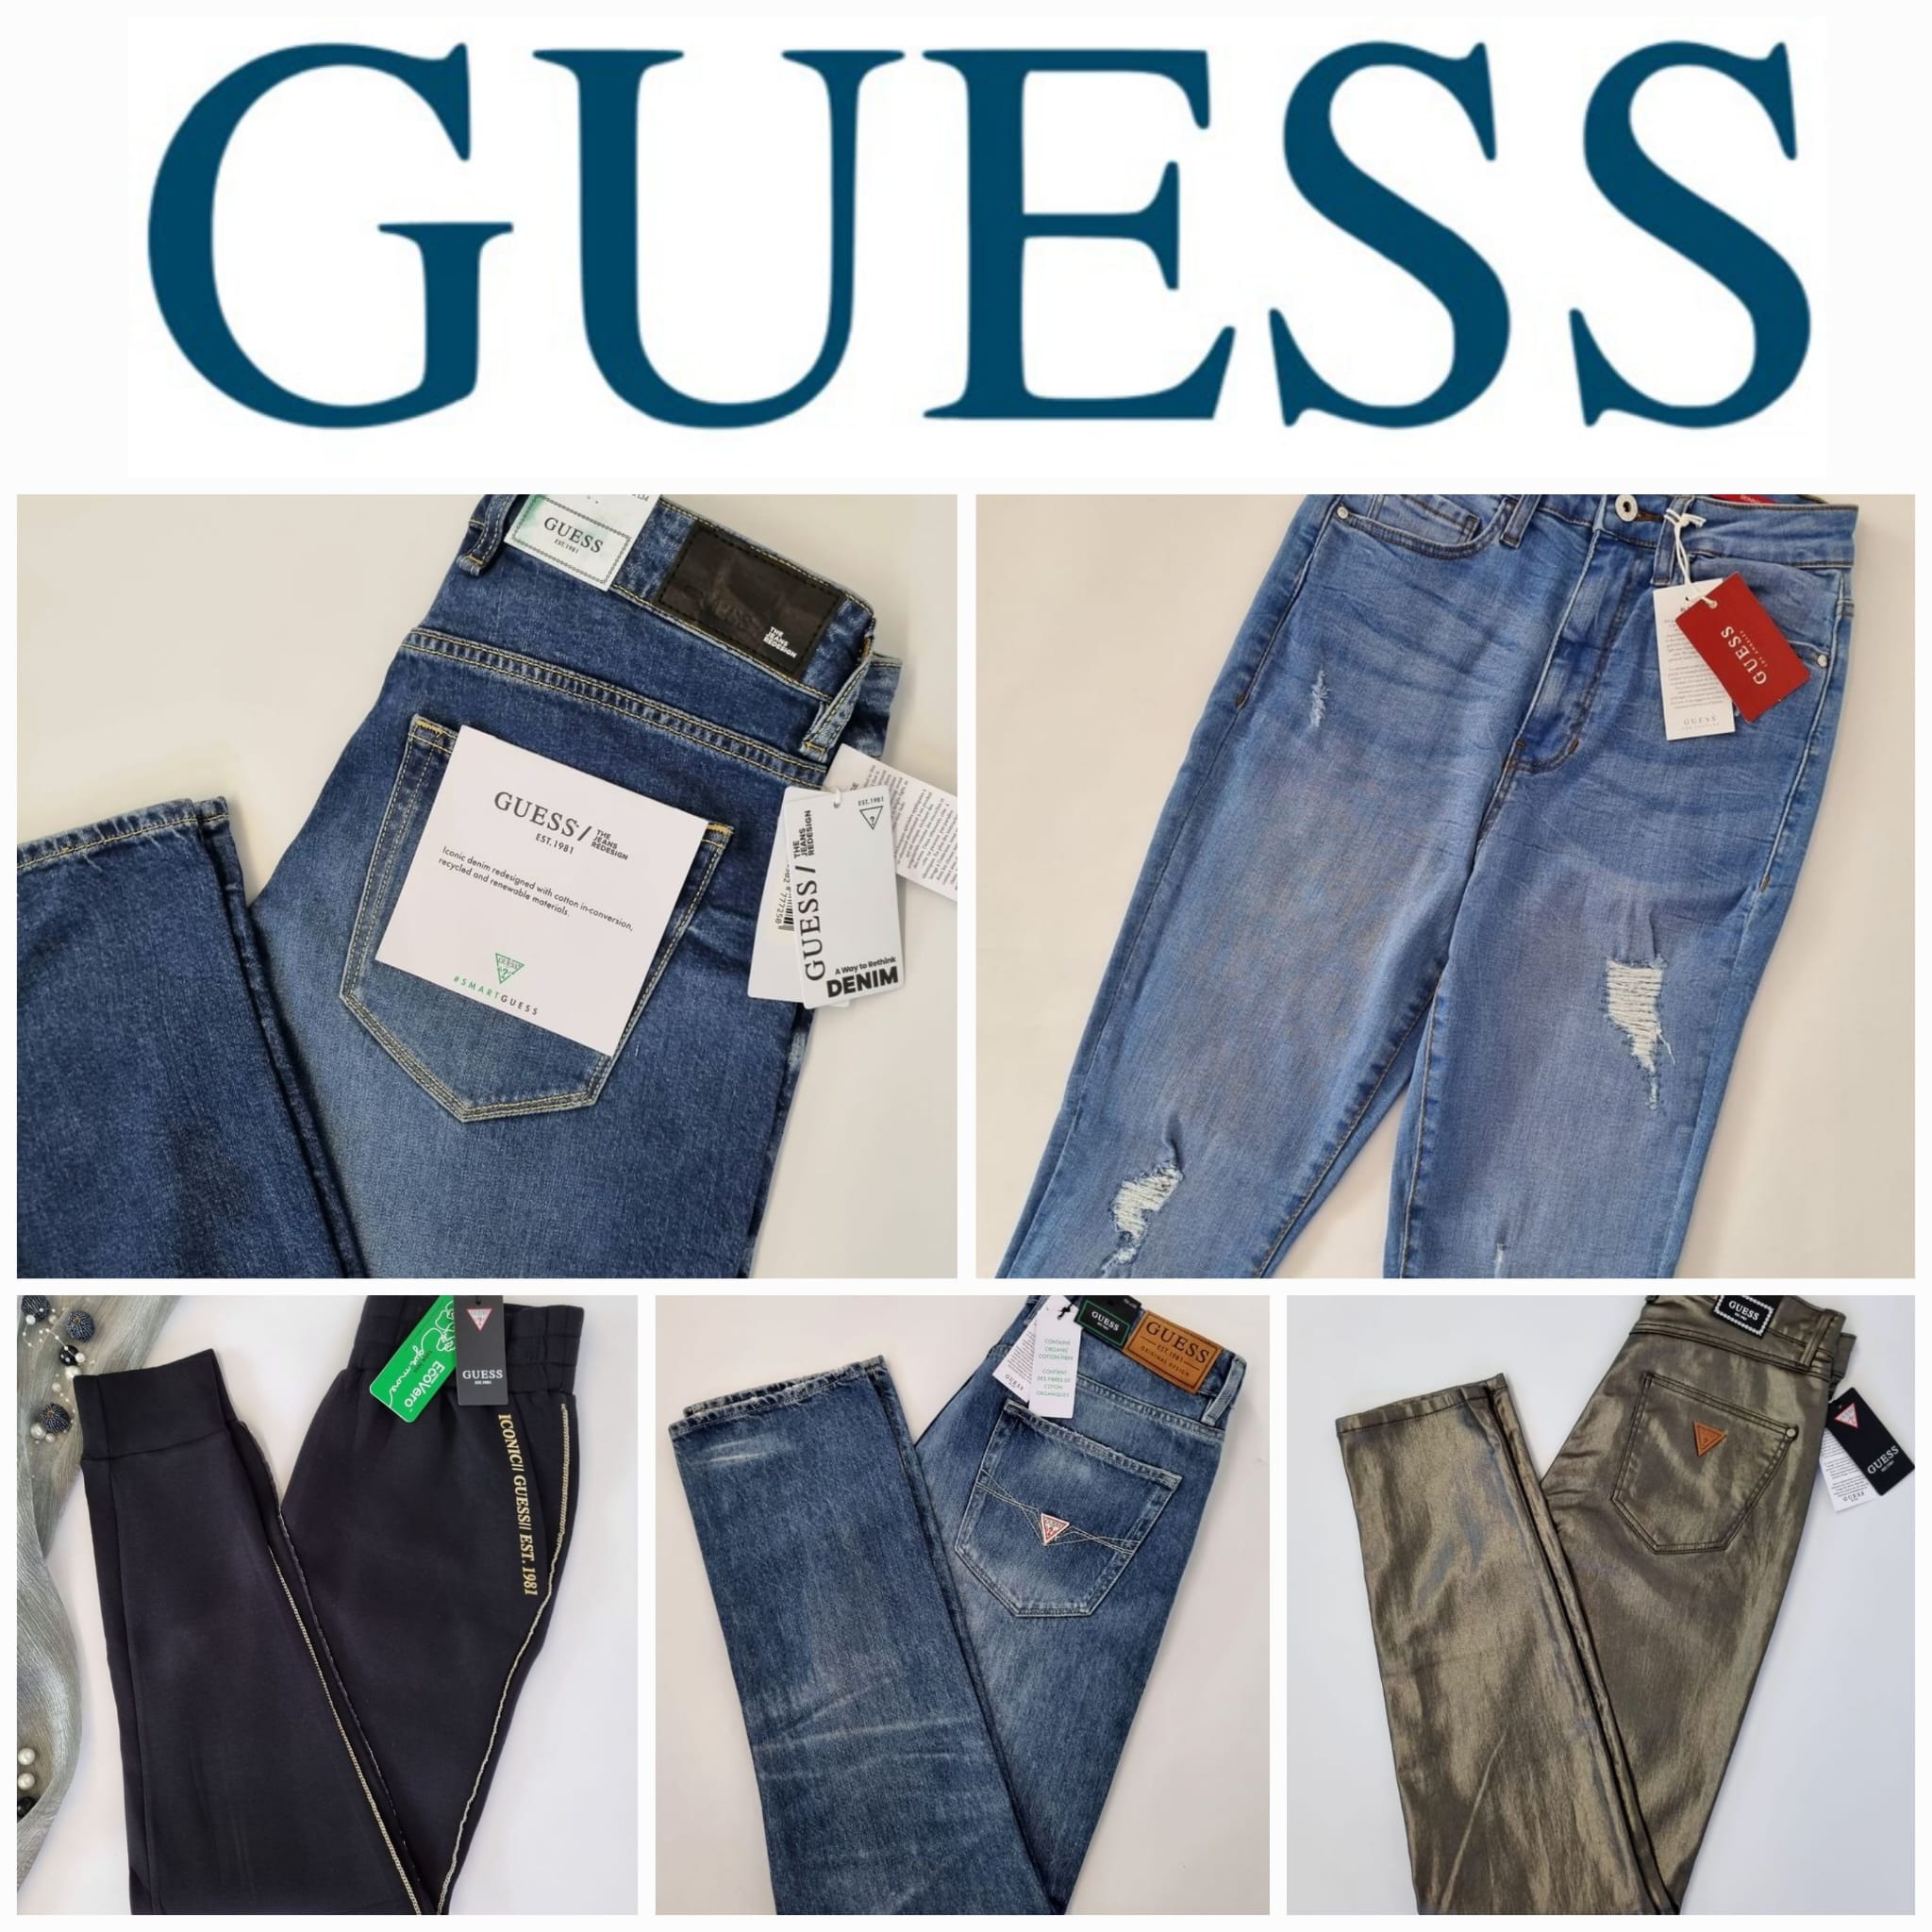 Mixed jeans and trousers from Guess